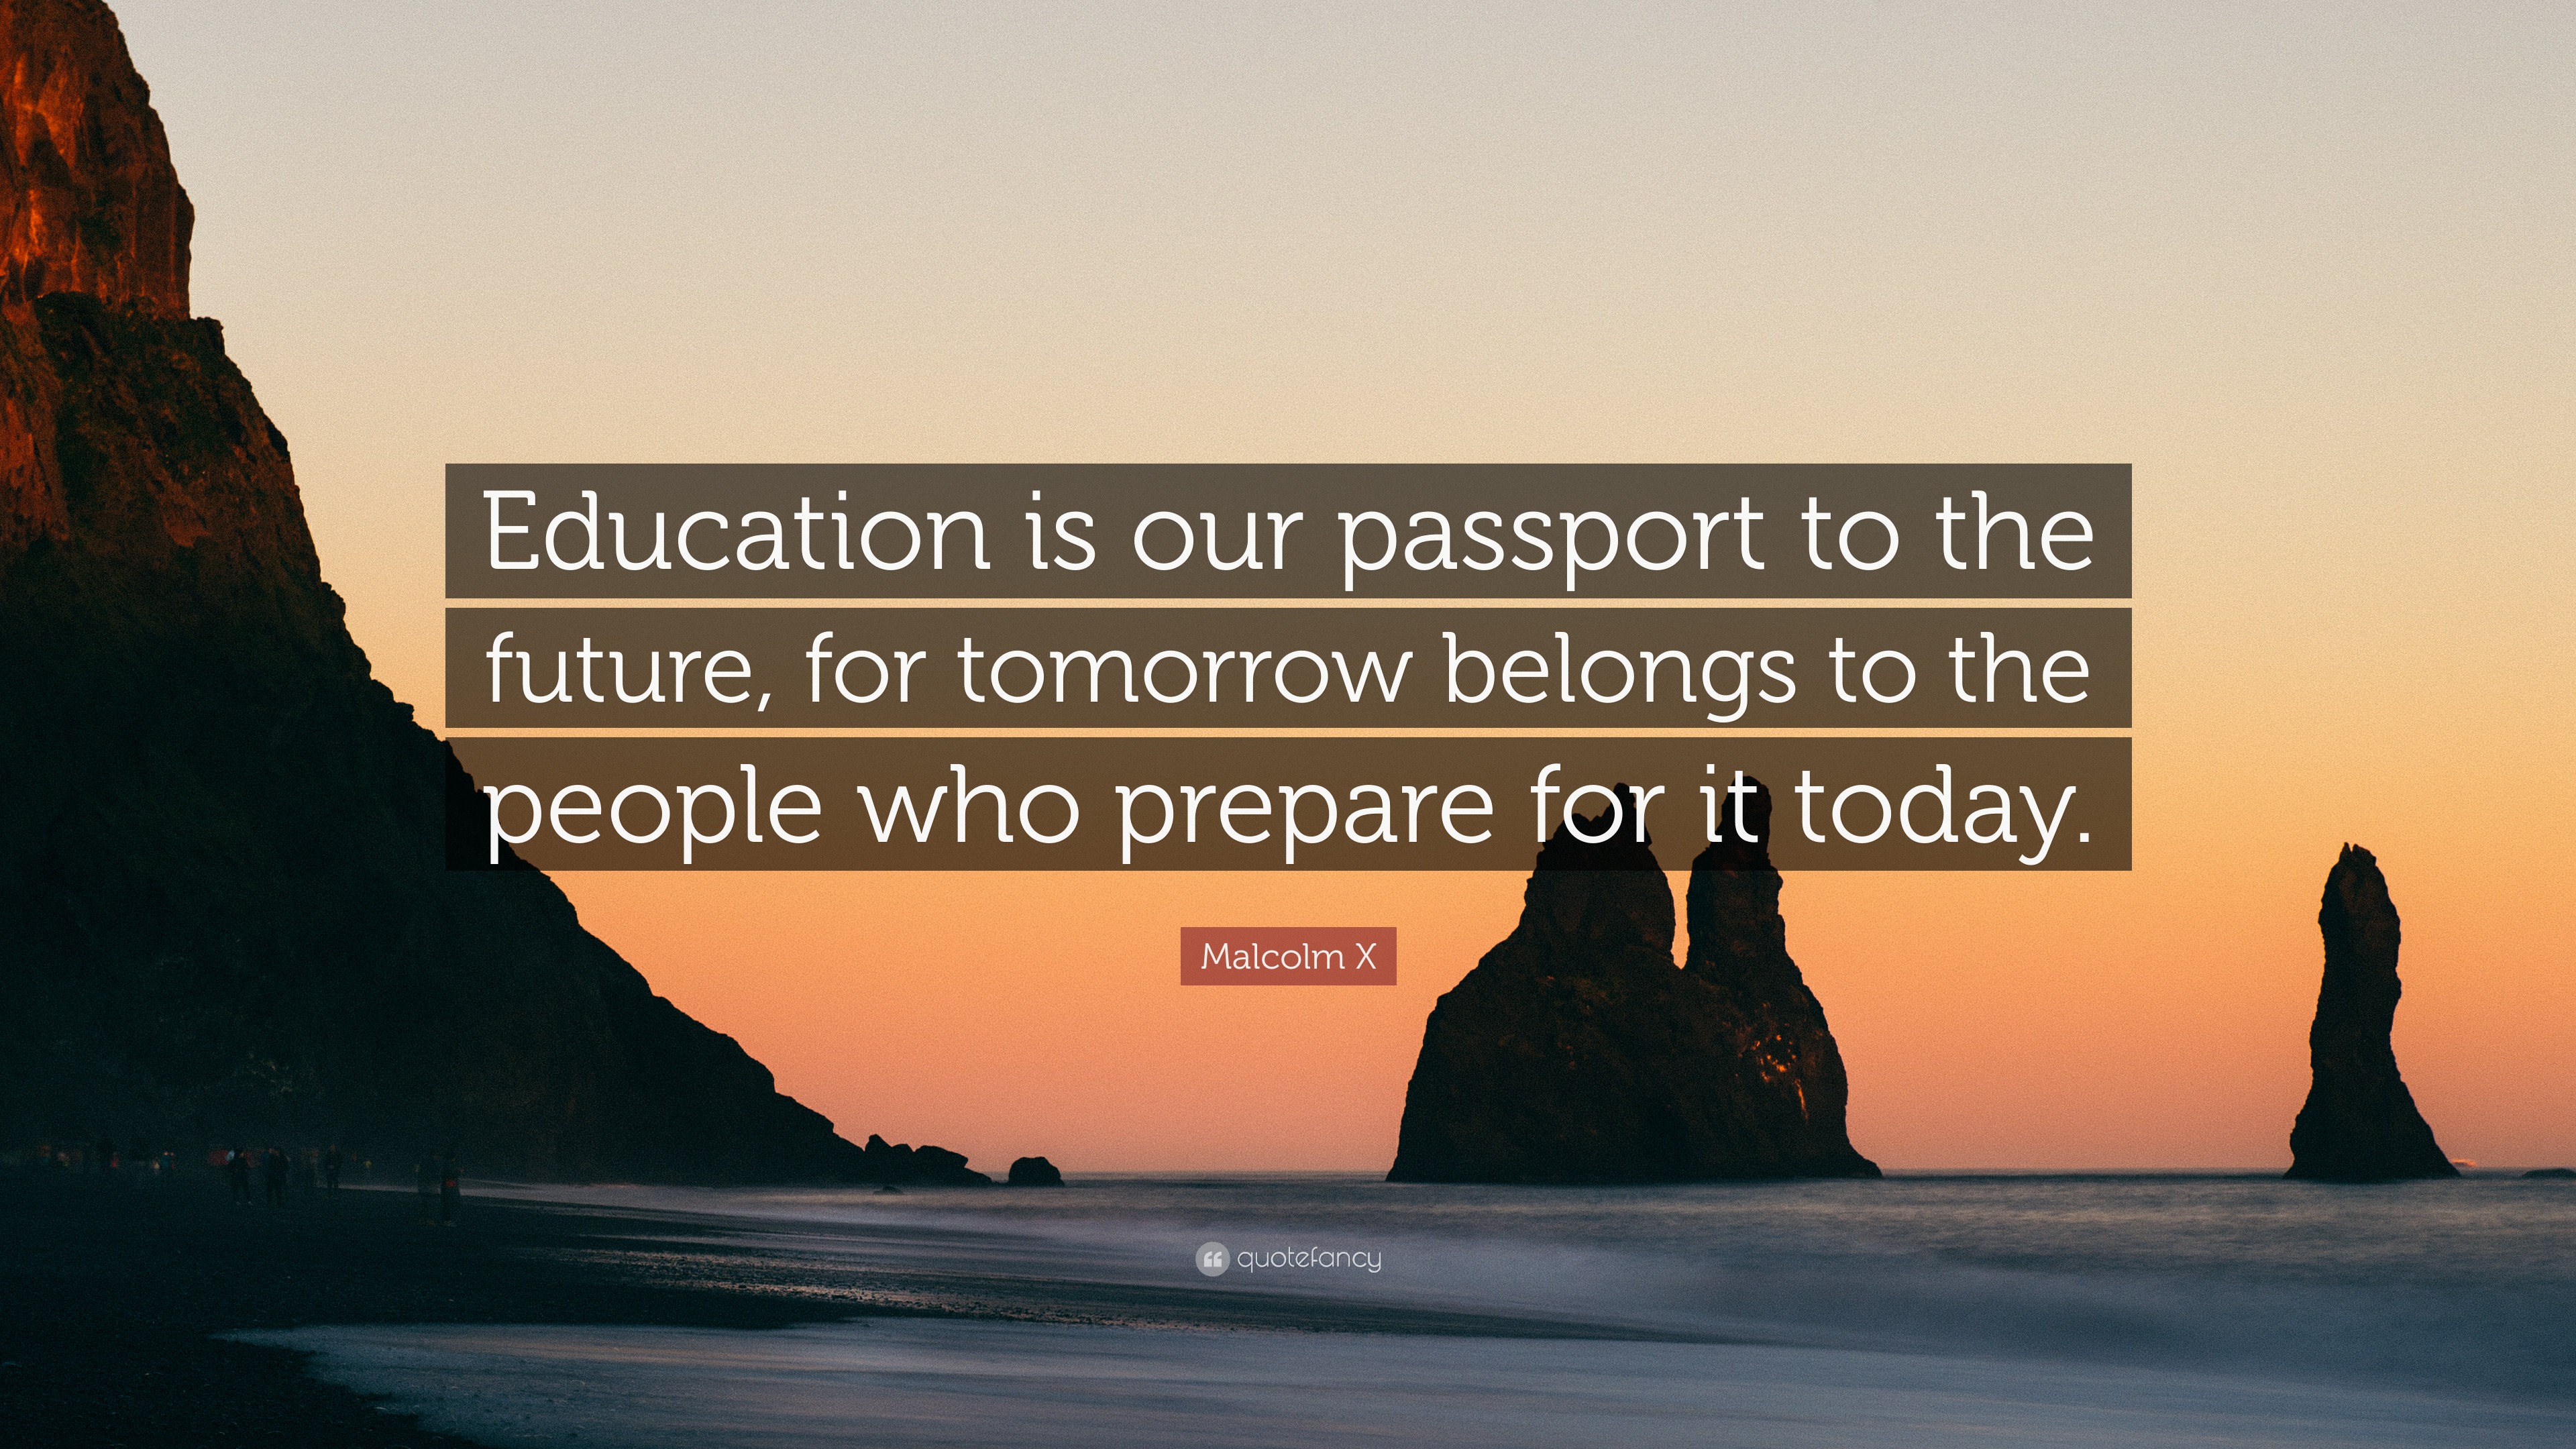 essay about education is the passport to the future